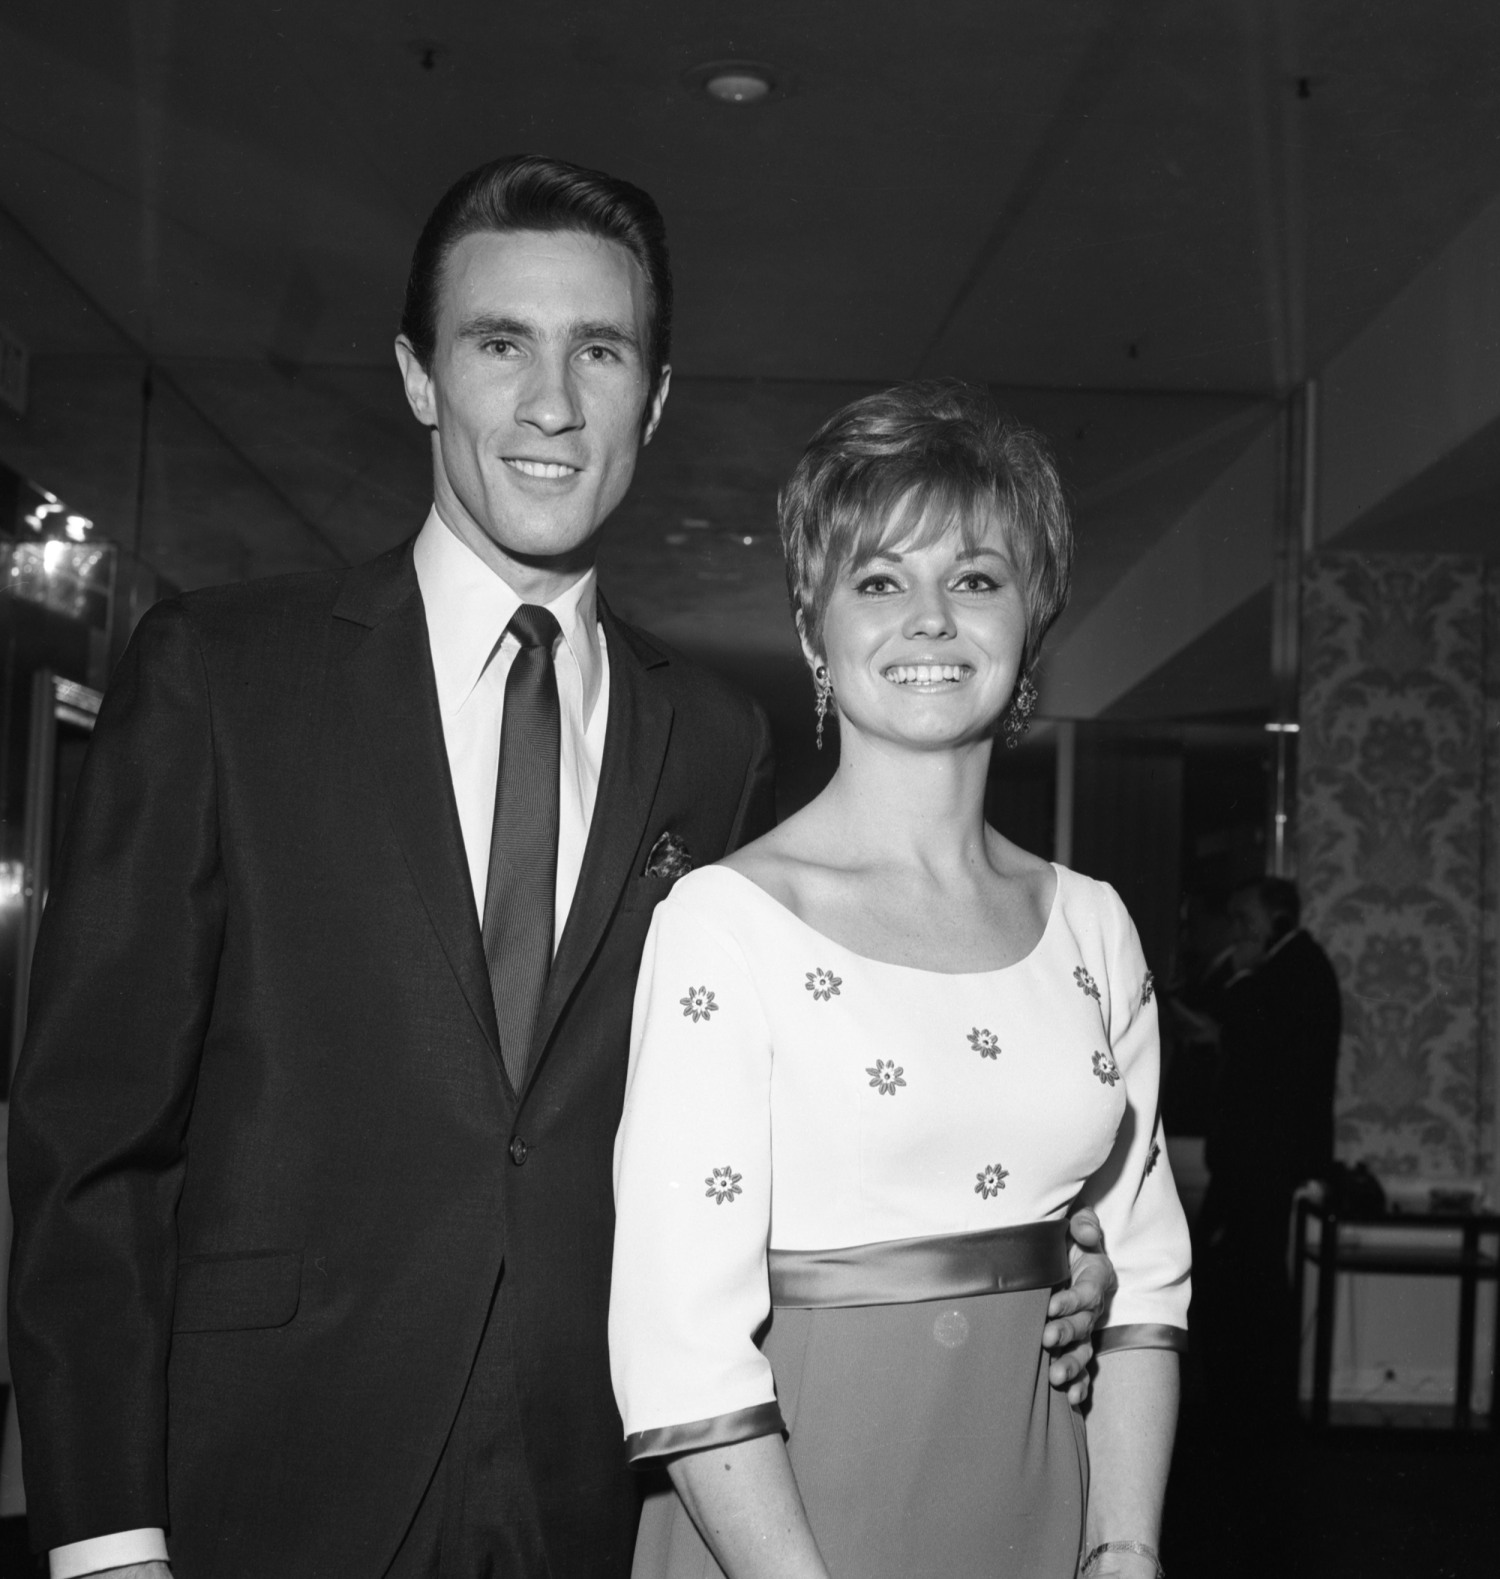 Murder of Righteous Brothers Singers Ex-Wife Karen Klaas Solved 40 Years Later photo